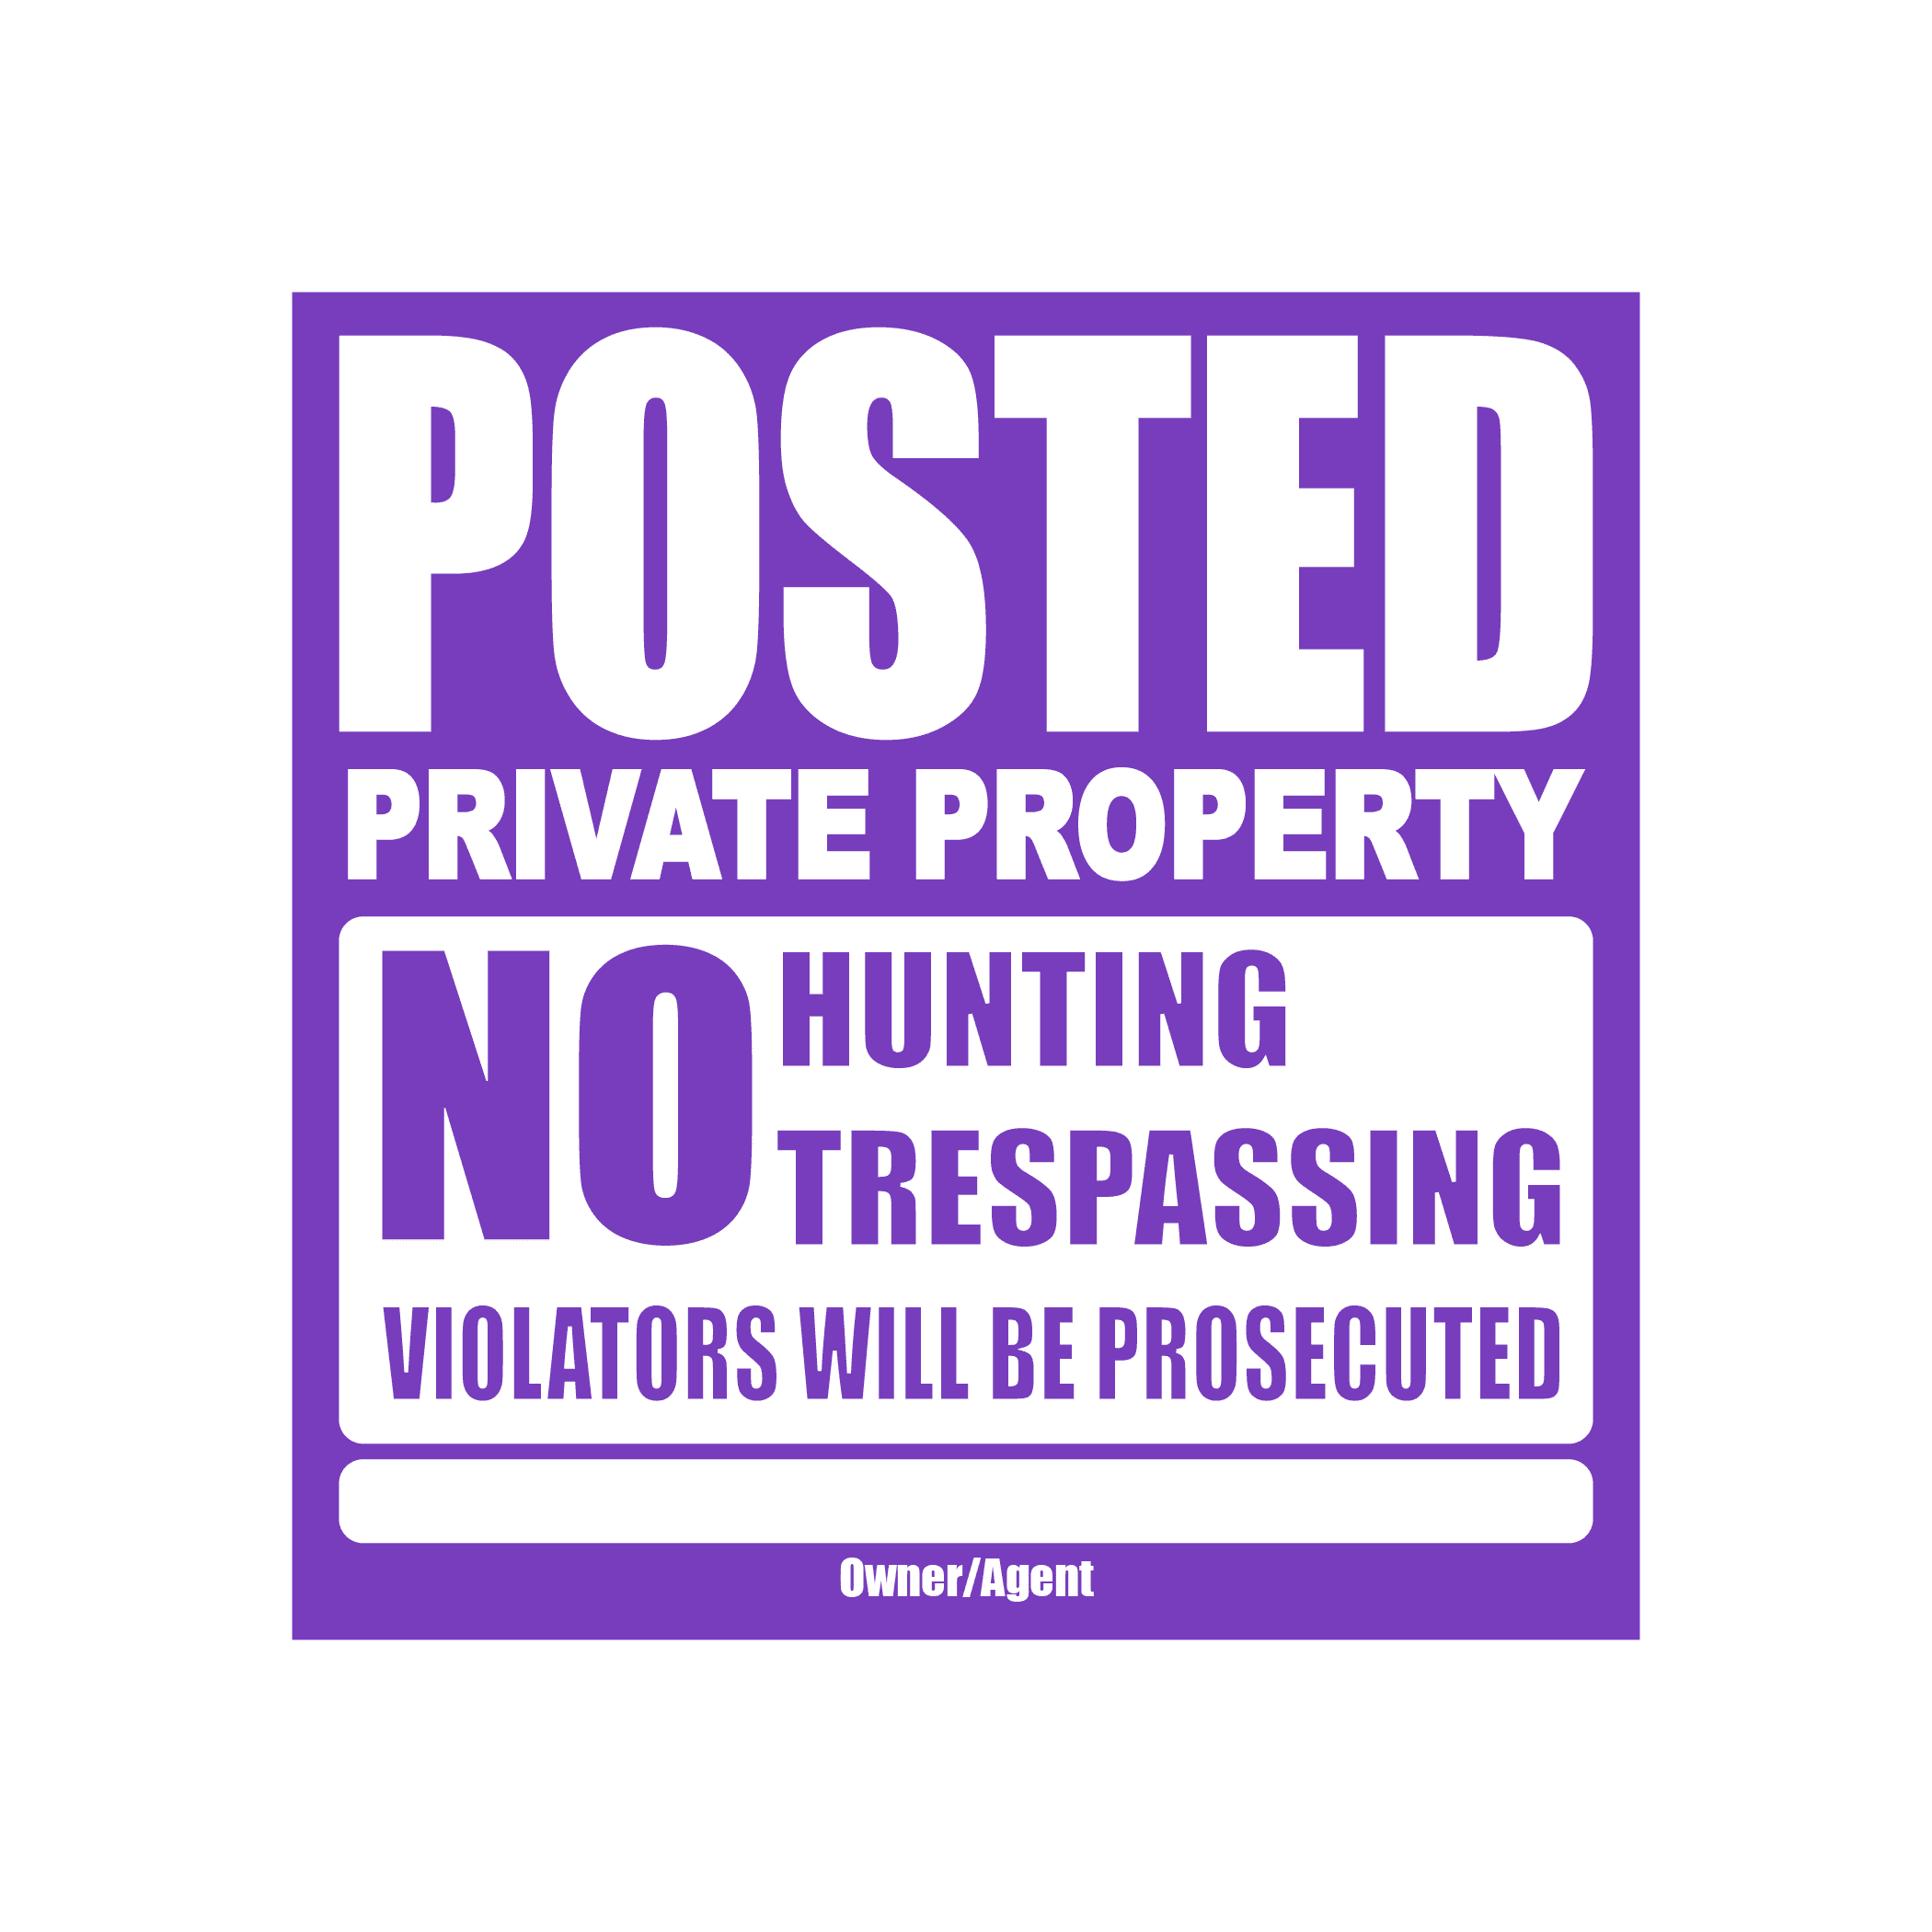 Posted Private Property 50 Tyvek Signs on a Roll No Hunting Trespassing